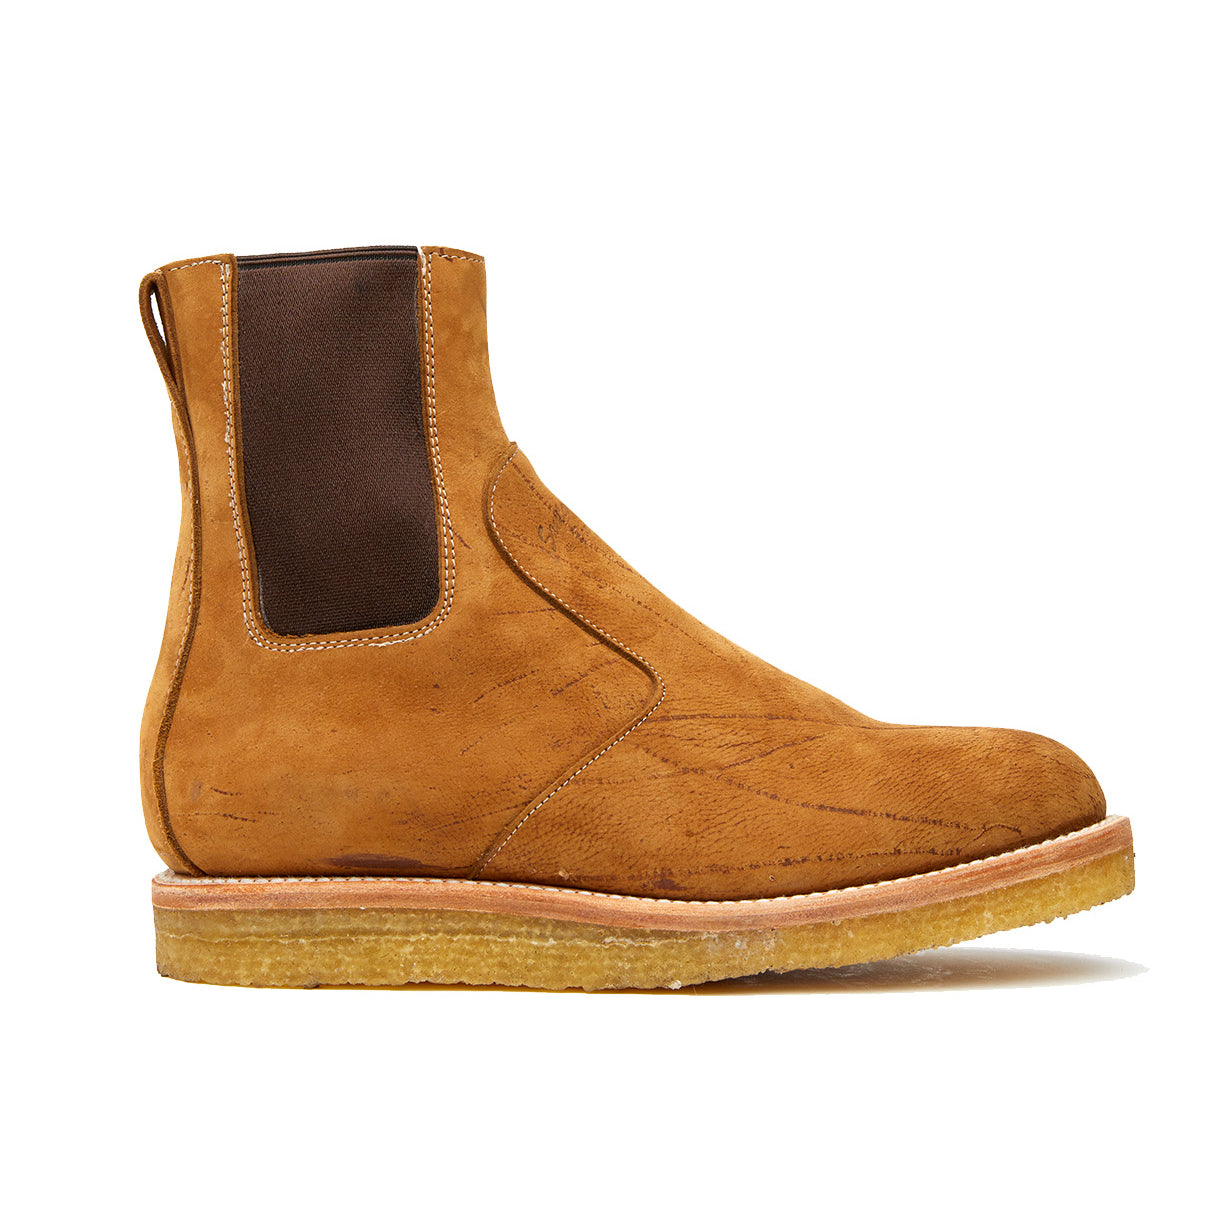 The Santa Rosa Brand Stamford Boot, made of veg tan leather, features a tan sued chelsea design on a white background. With its natural crepe outsole, this boot adds both style and comfort to.